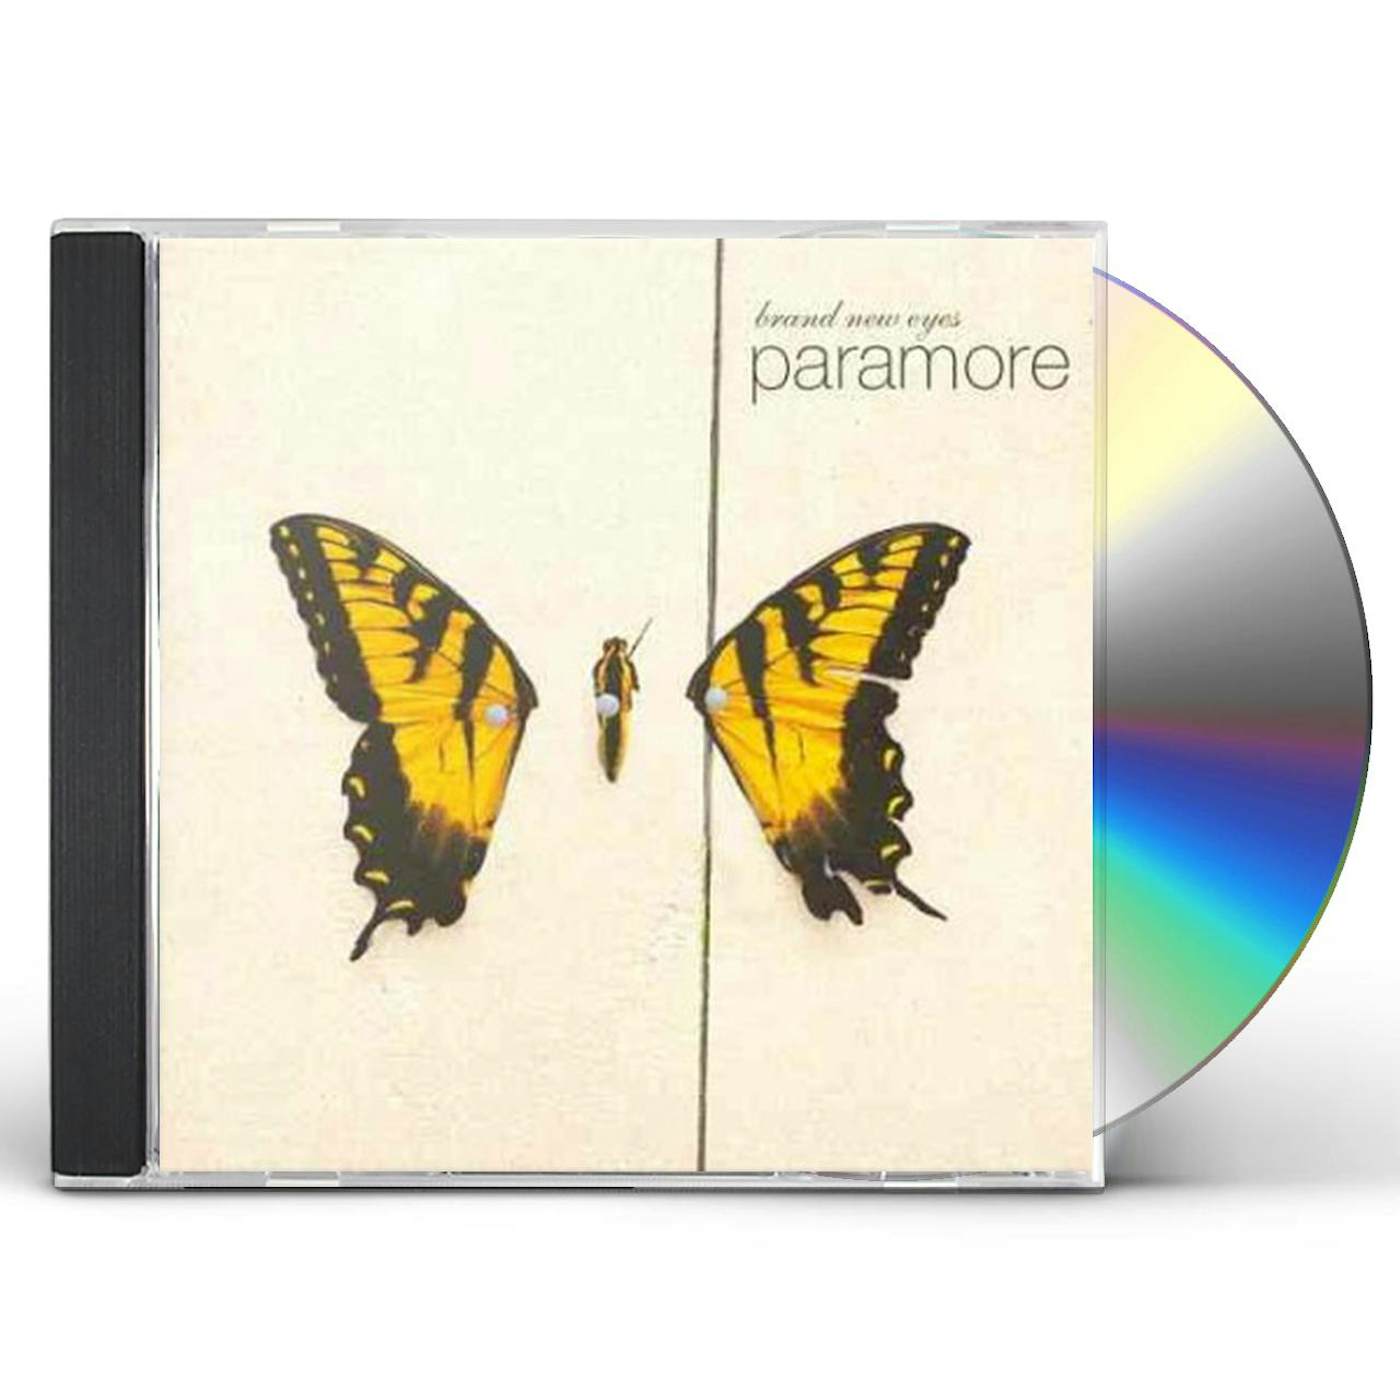 Brand New Eyes by Paramore  Paramore, Poker table, Home decor